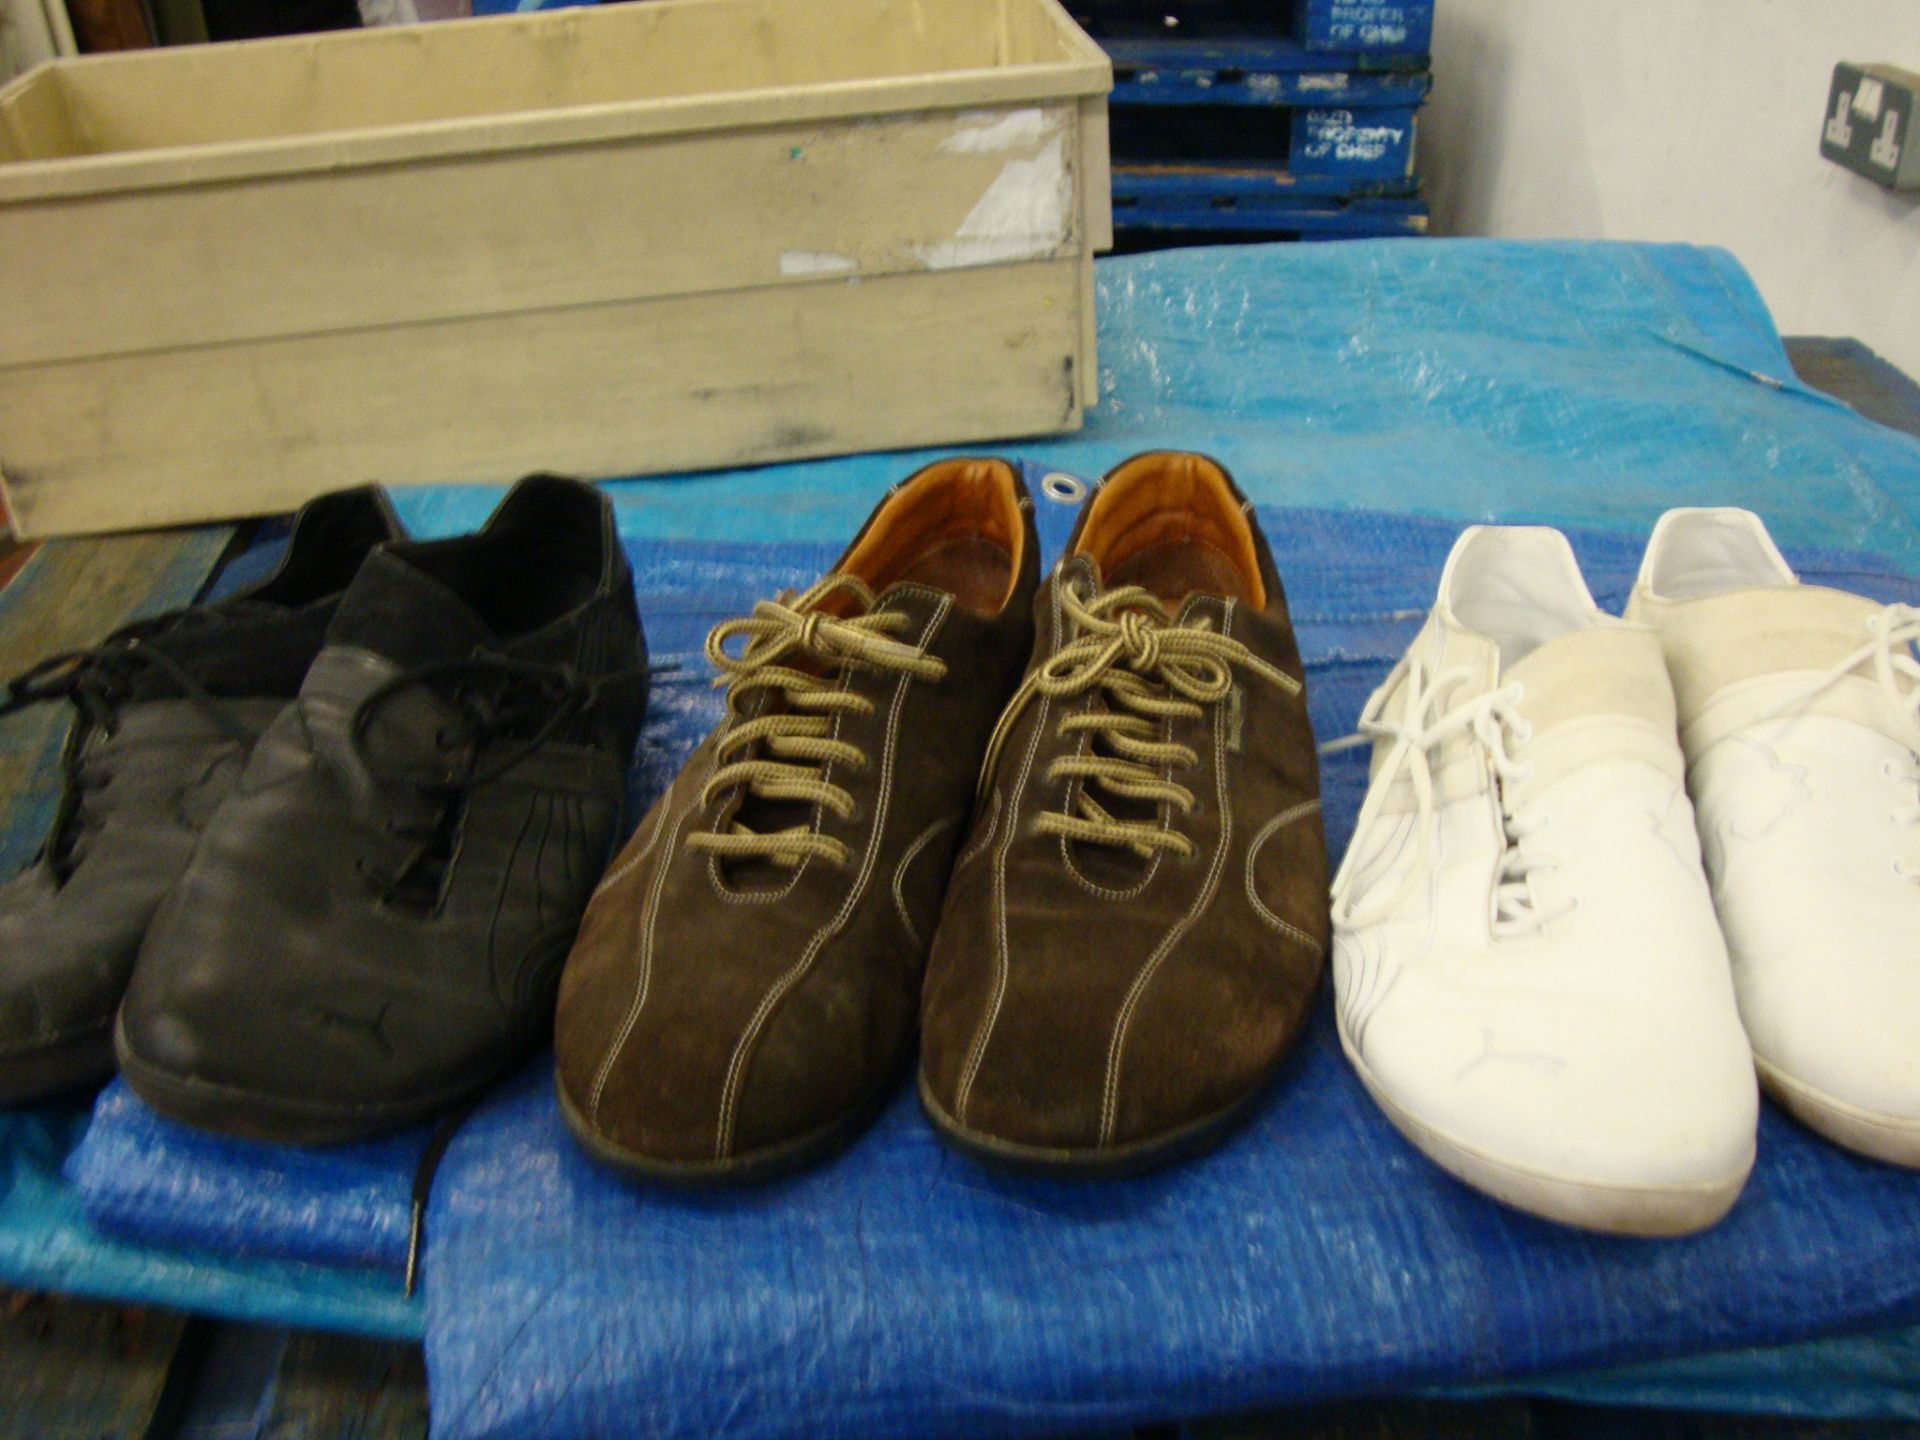 3 pairs of men's trainers, one by Russell & Bromley in chocolate brown suede being size 46 and the